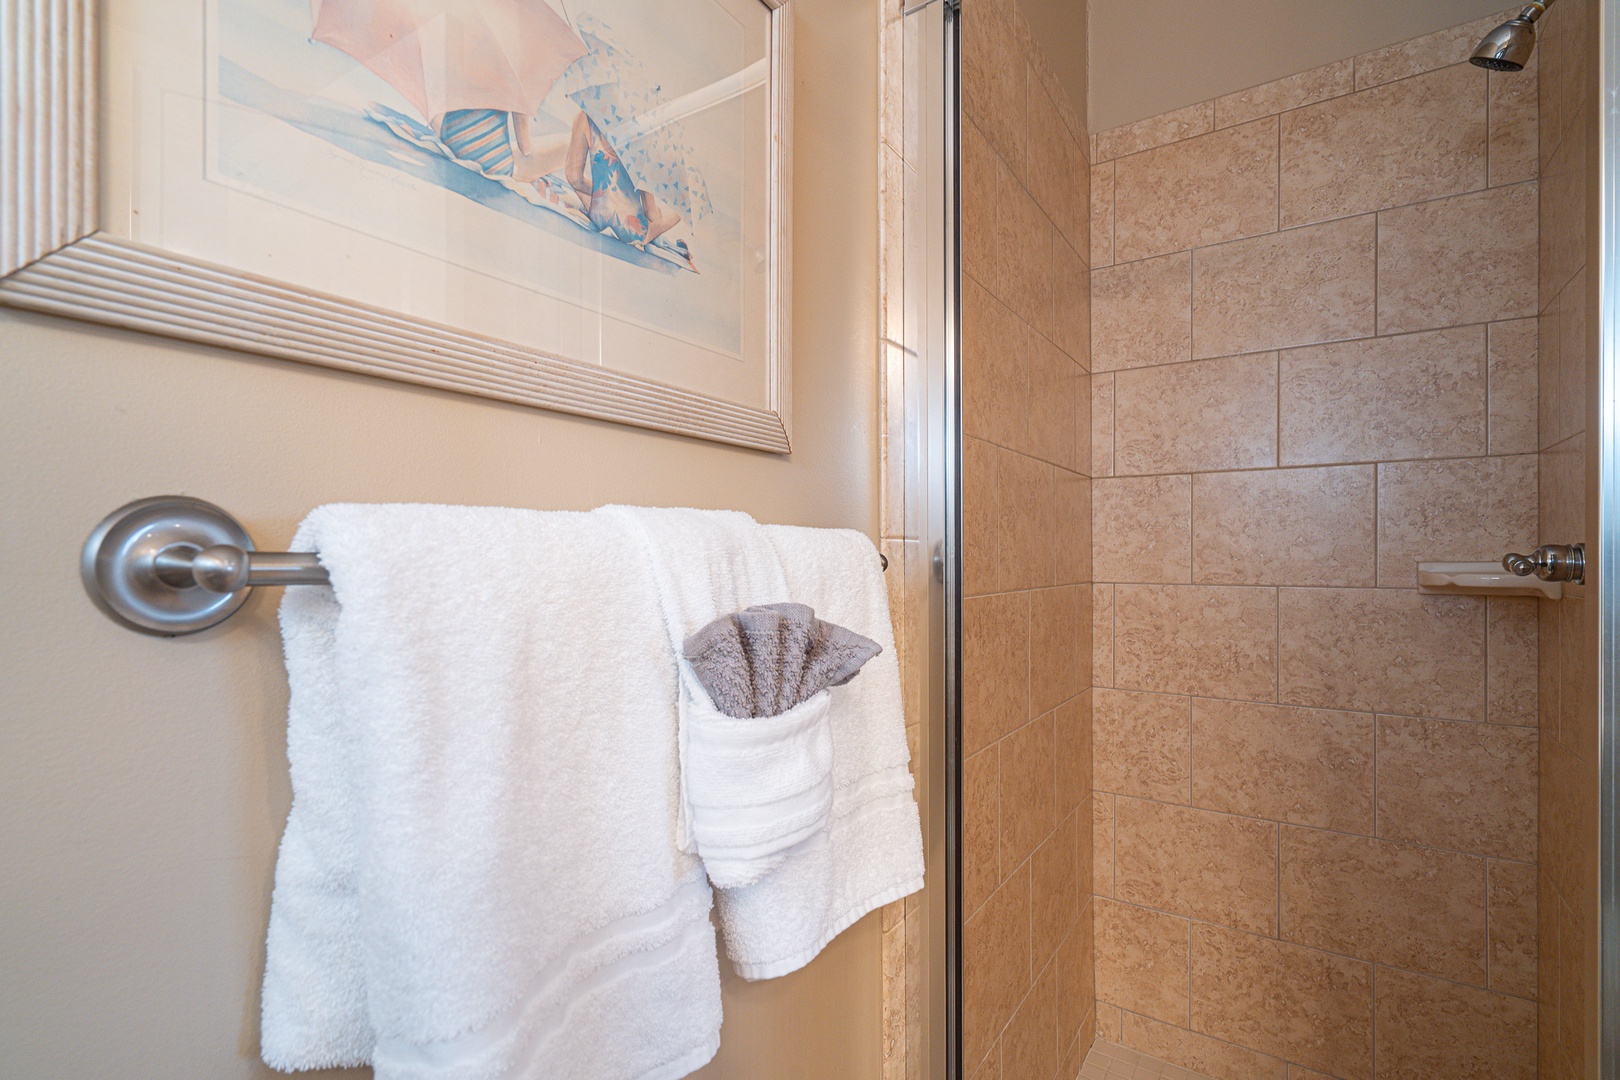 A full bath with pedestal sink & shower is available on the 1st floor